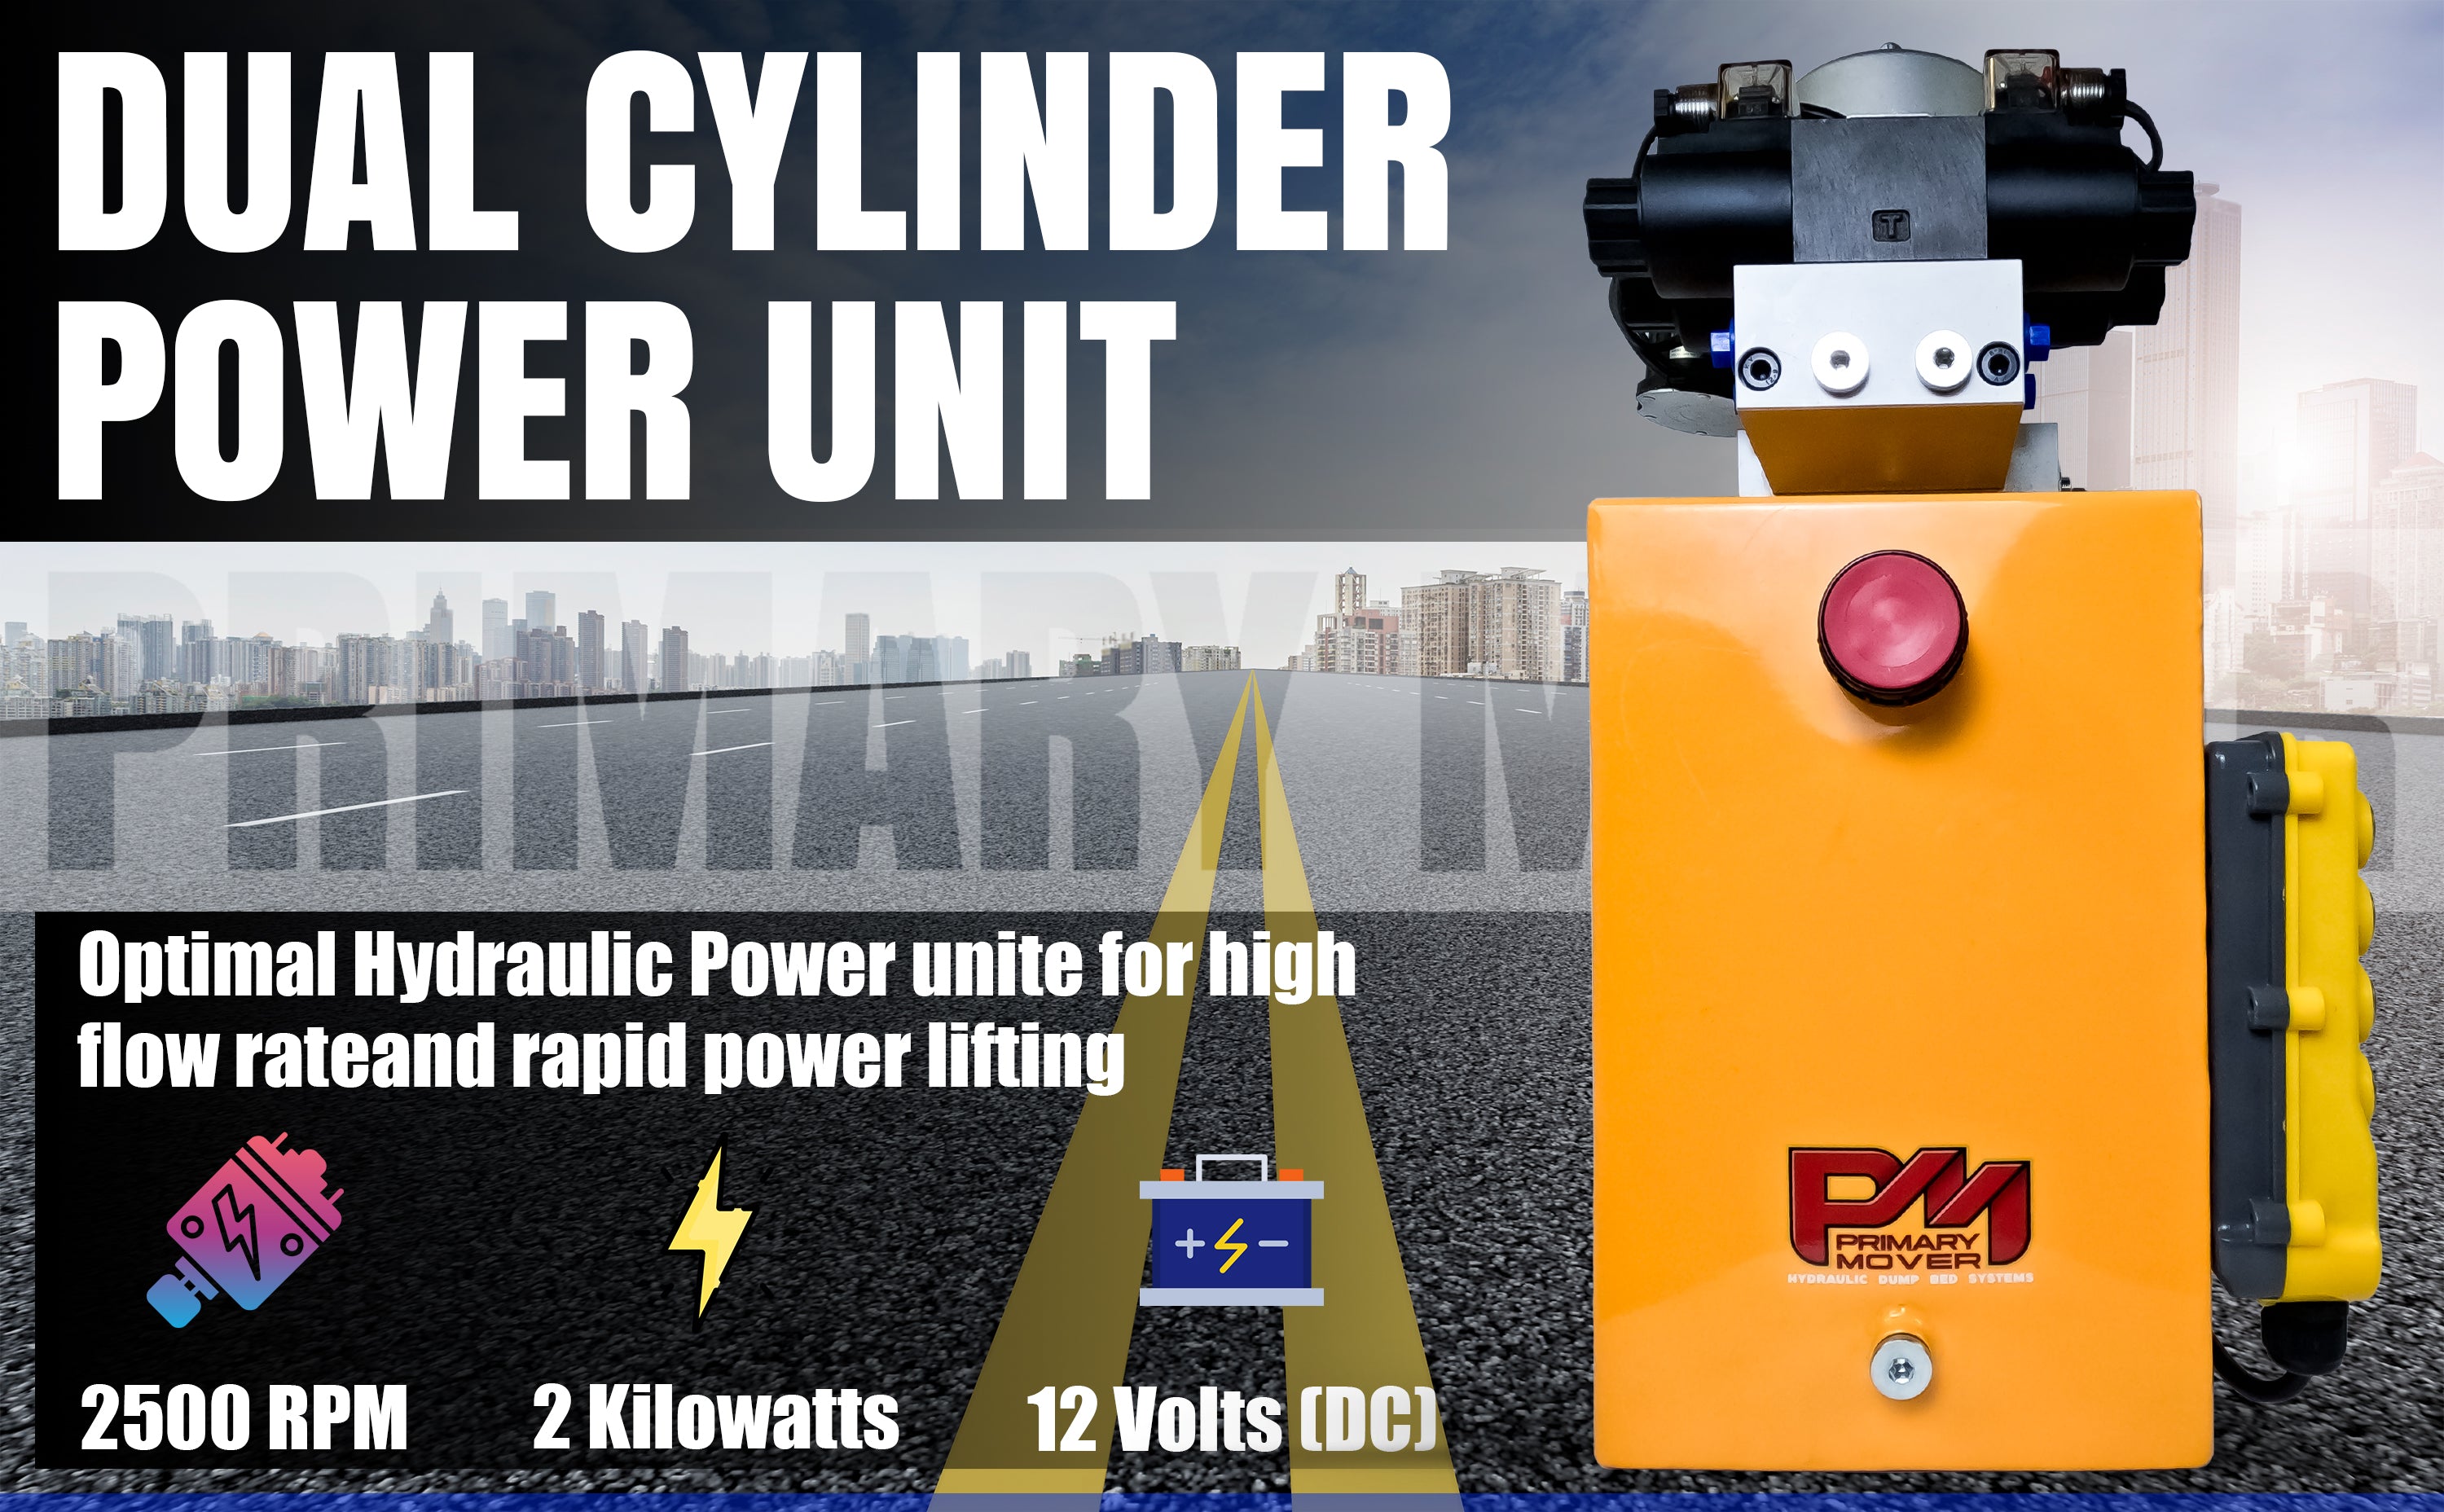 Primary Mover 12V Dual Double-Acting Hydraulic Power Unit: Compact, robust steel construction for dump trailers and trucks, enabling four hydraulic actions simultaneously. Used for any truck or trailer application. 1/2 ton truck dump bed kit.